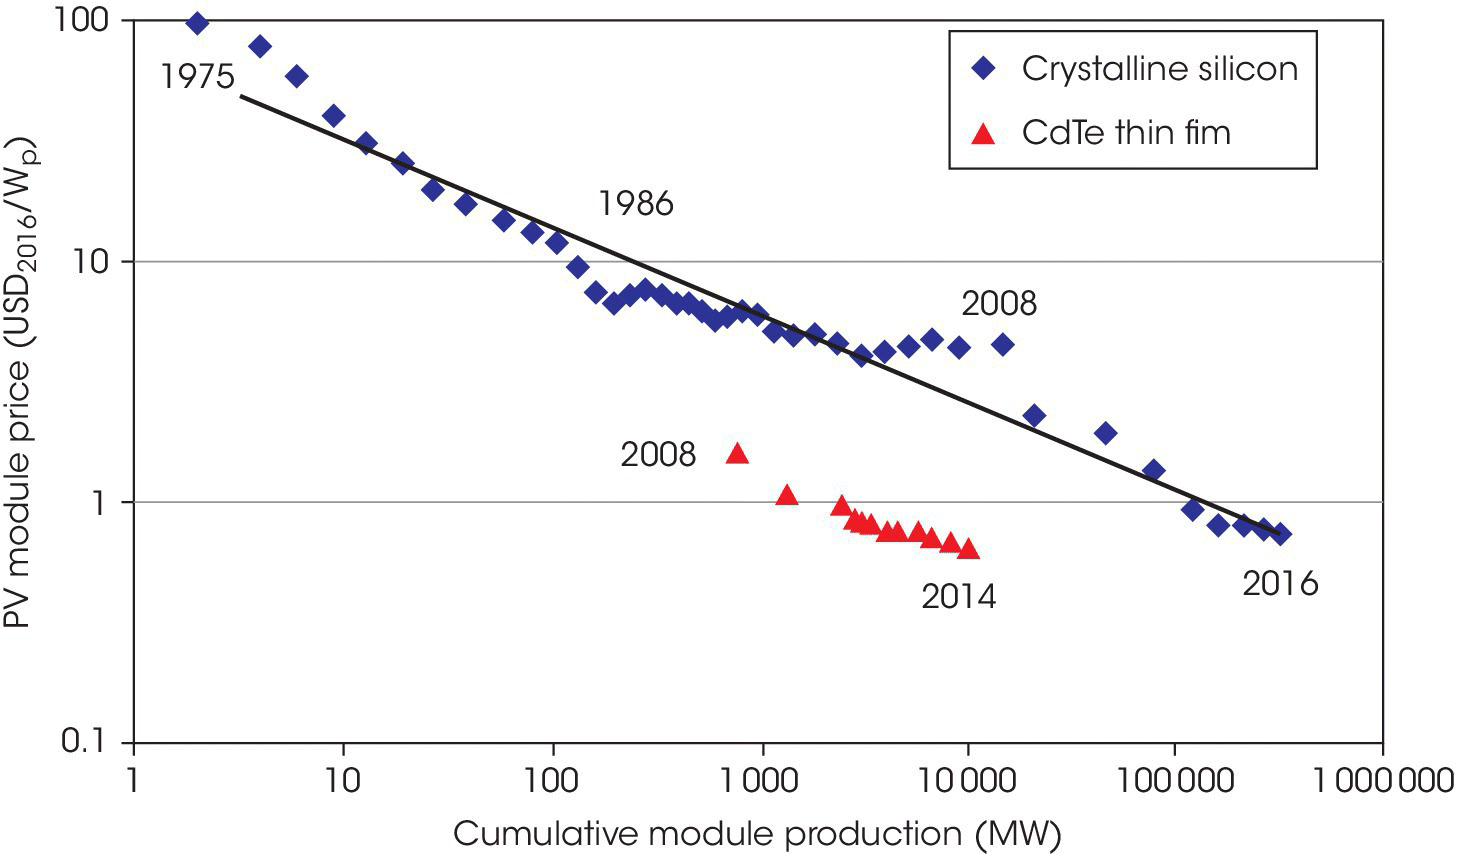 Graph of cumulative module production (MW) vs. PV module price (USD2016/Wp) depicting a diagonal line with intersecting discrete plot markers for crystalline silicon (diamonds) and CdTe thin fim (triangles).